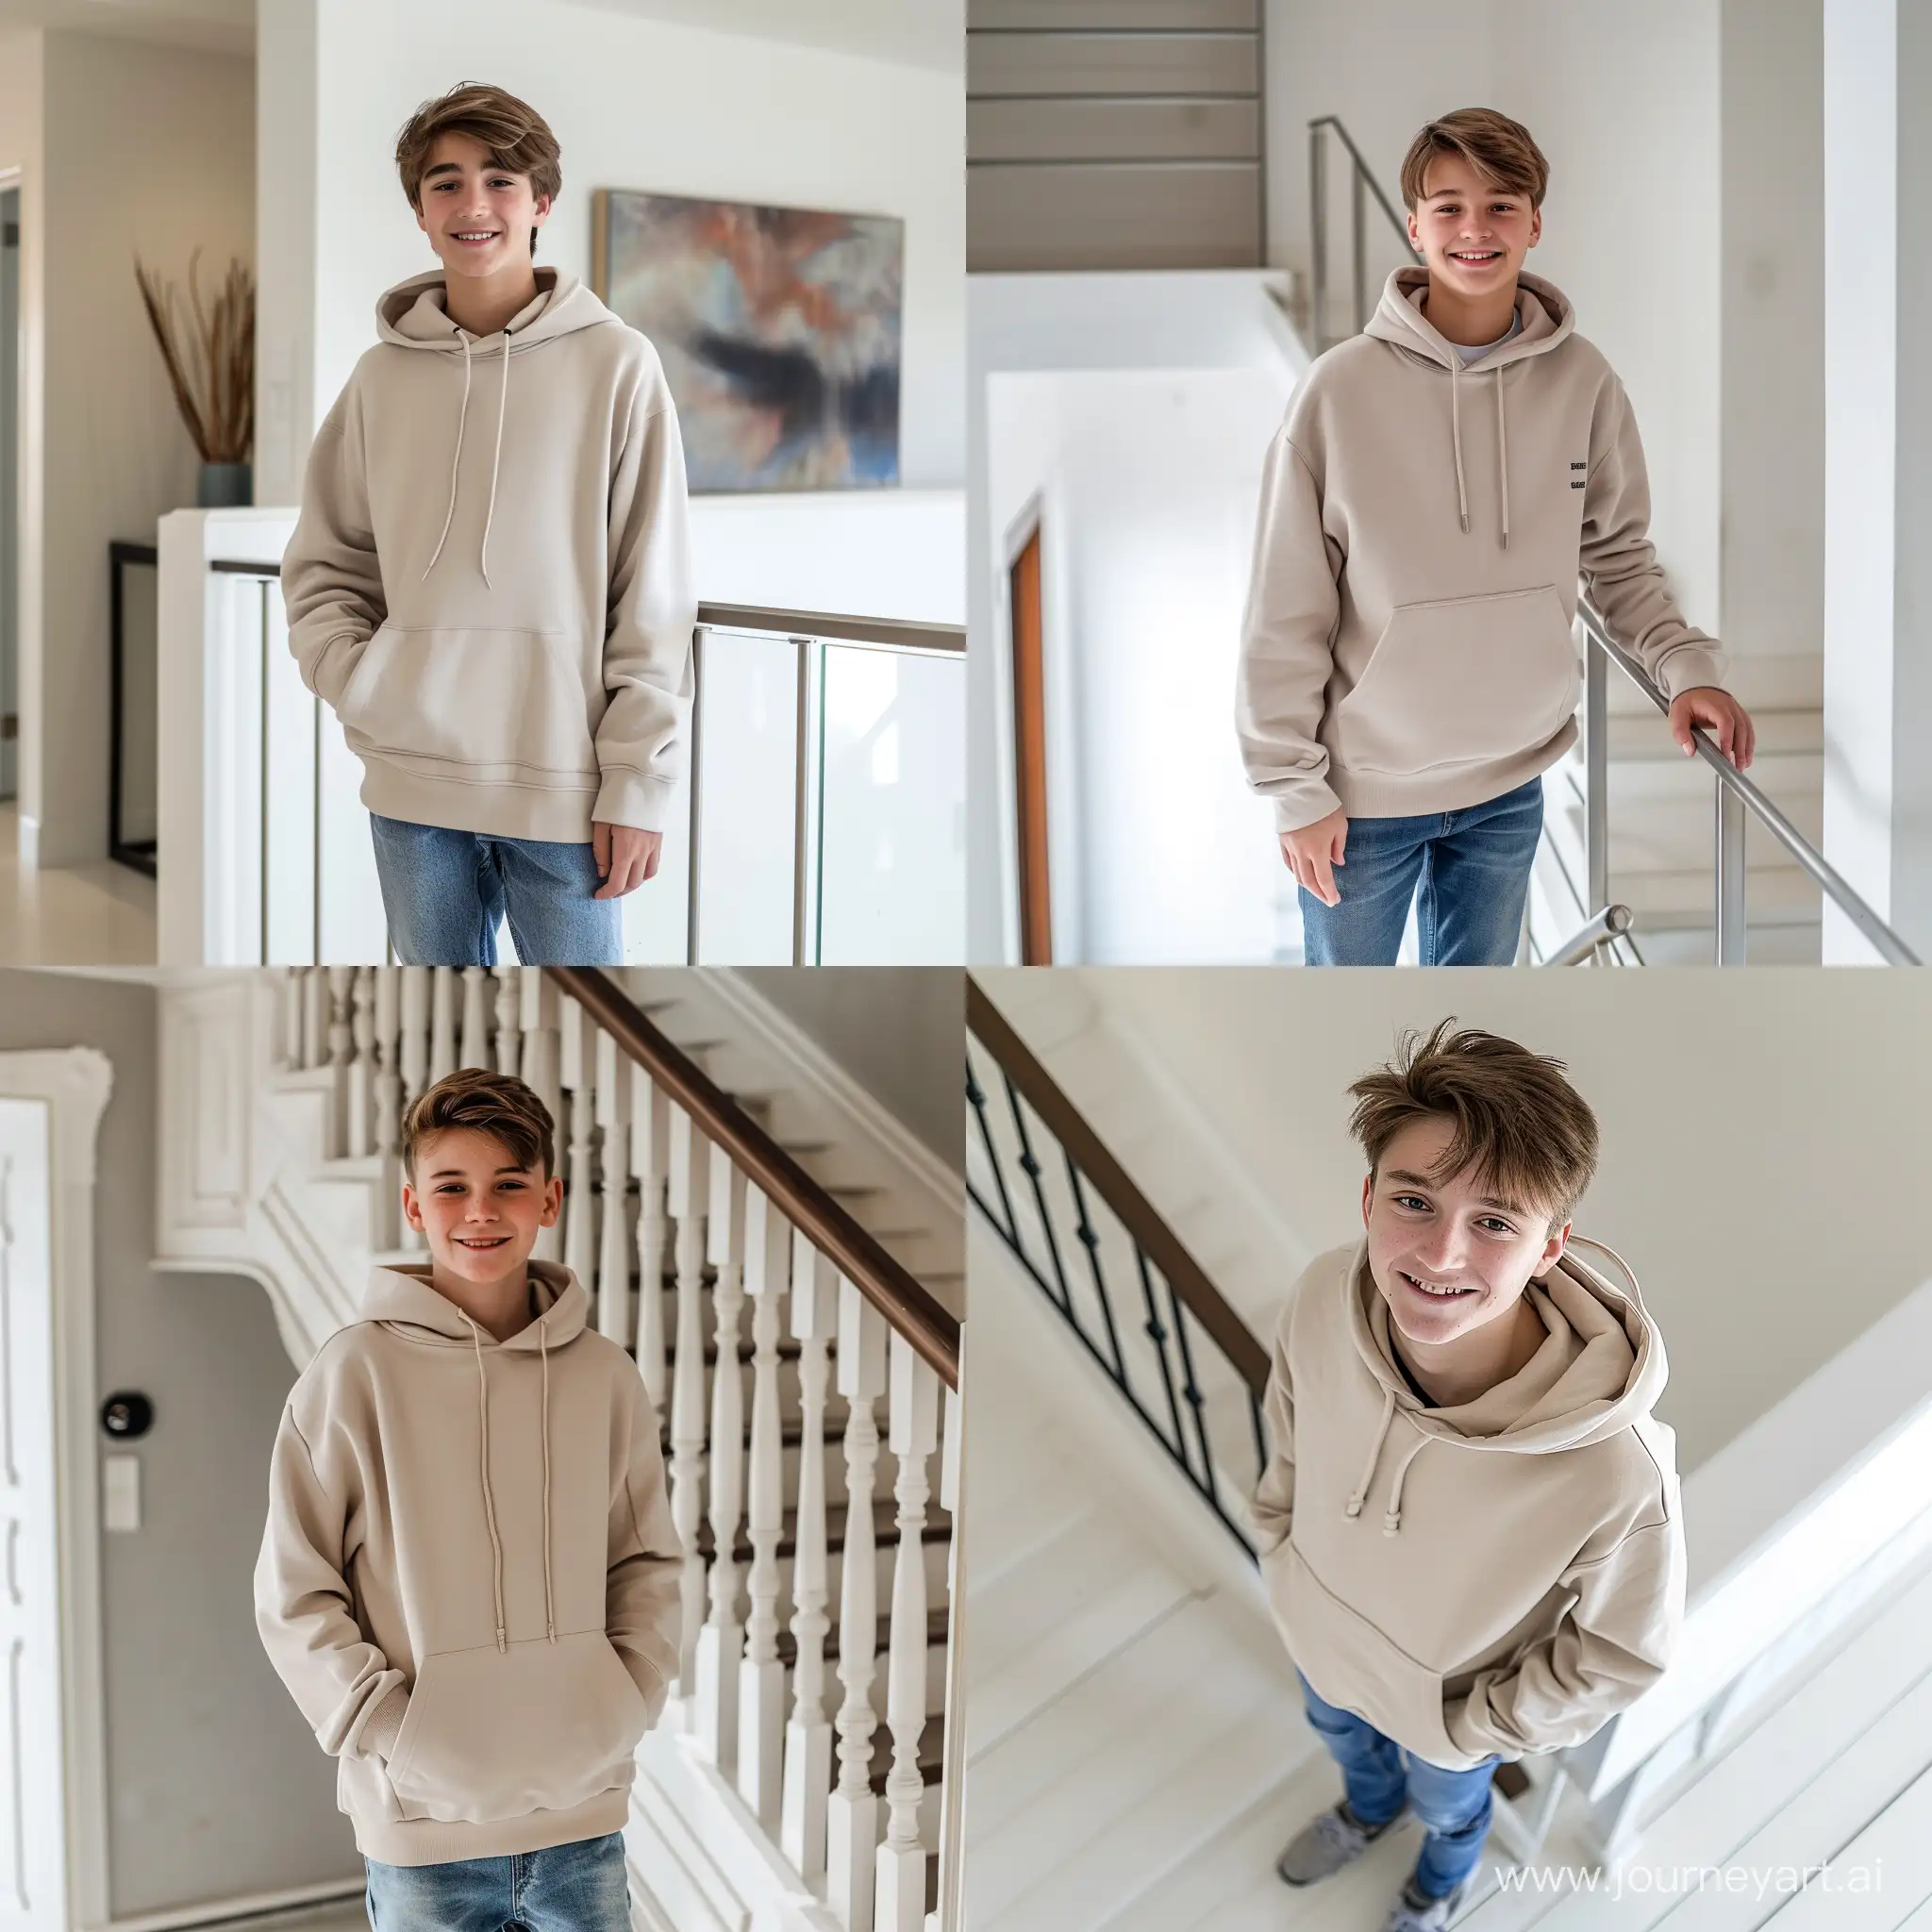 Generate a 14-year-old guy, cheerful, cute, smiling, stupid, naive. He stands on a white foyer in full height, half-turned to face the camera. He is wearing a light beige sports hoodie and jeans. The image should be as realistic as possible as a photo